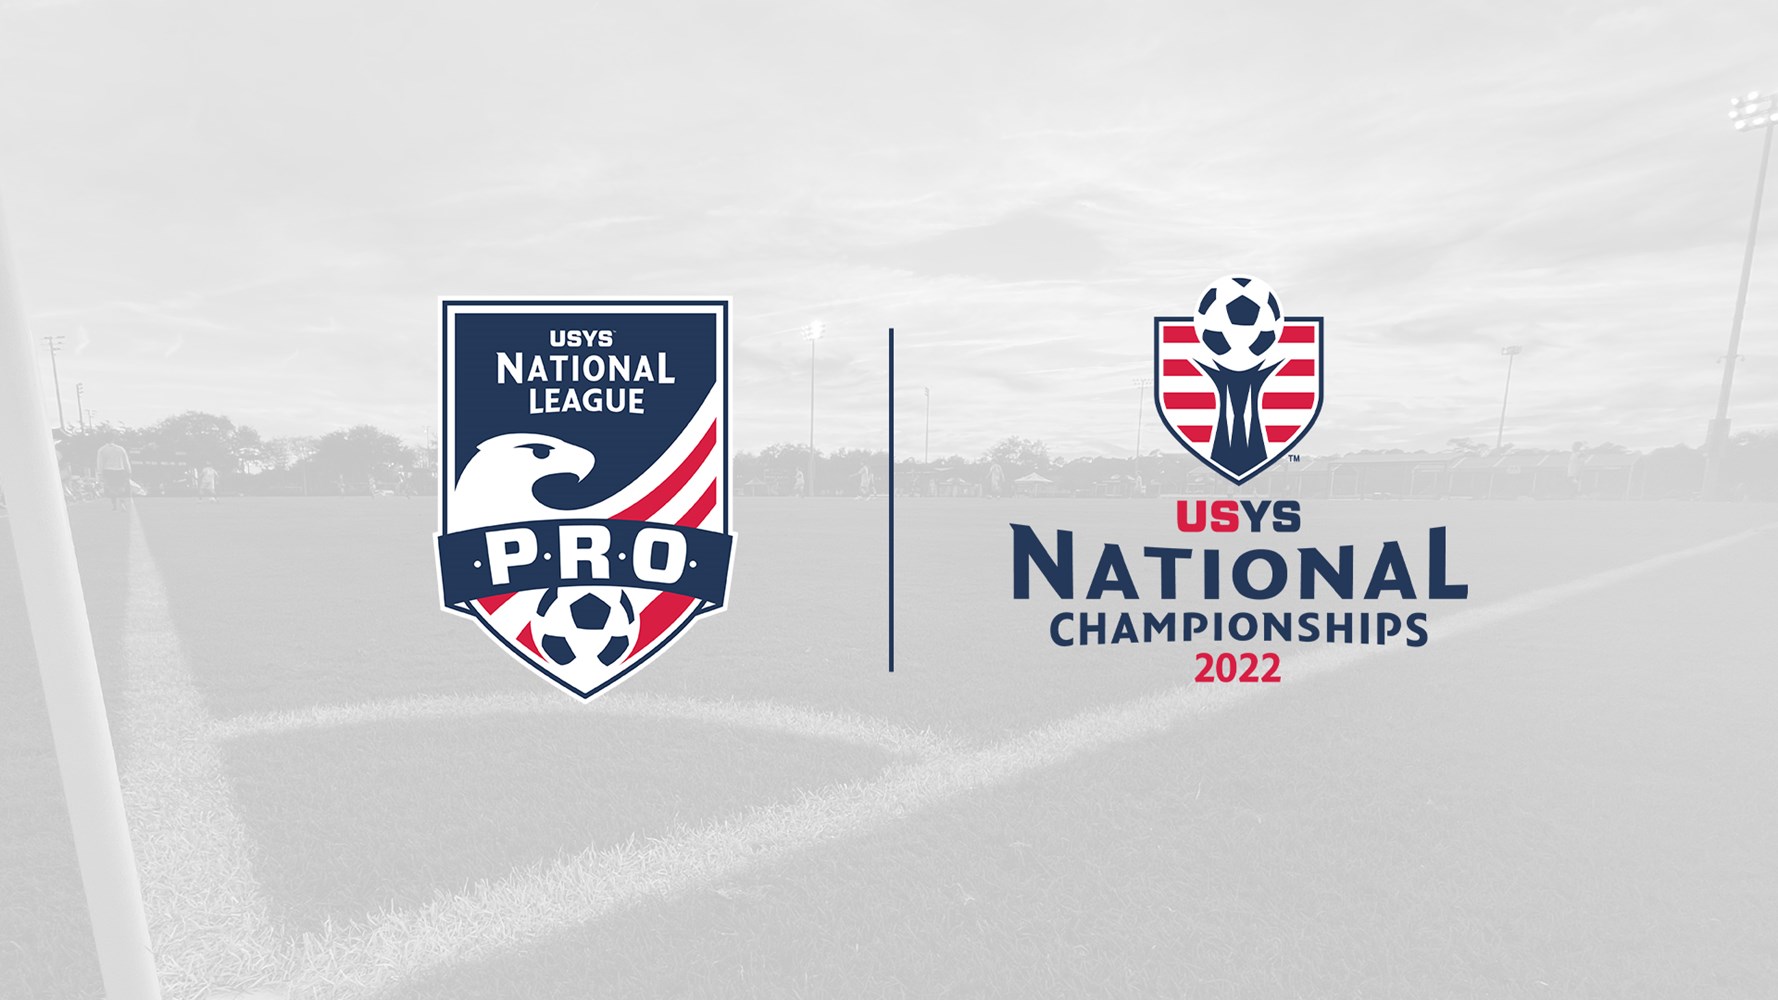 USYS National League P.R.O. Teams Punch Tickets to Championships - Union 10  Football